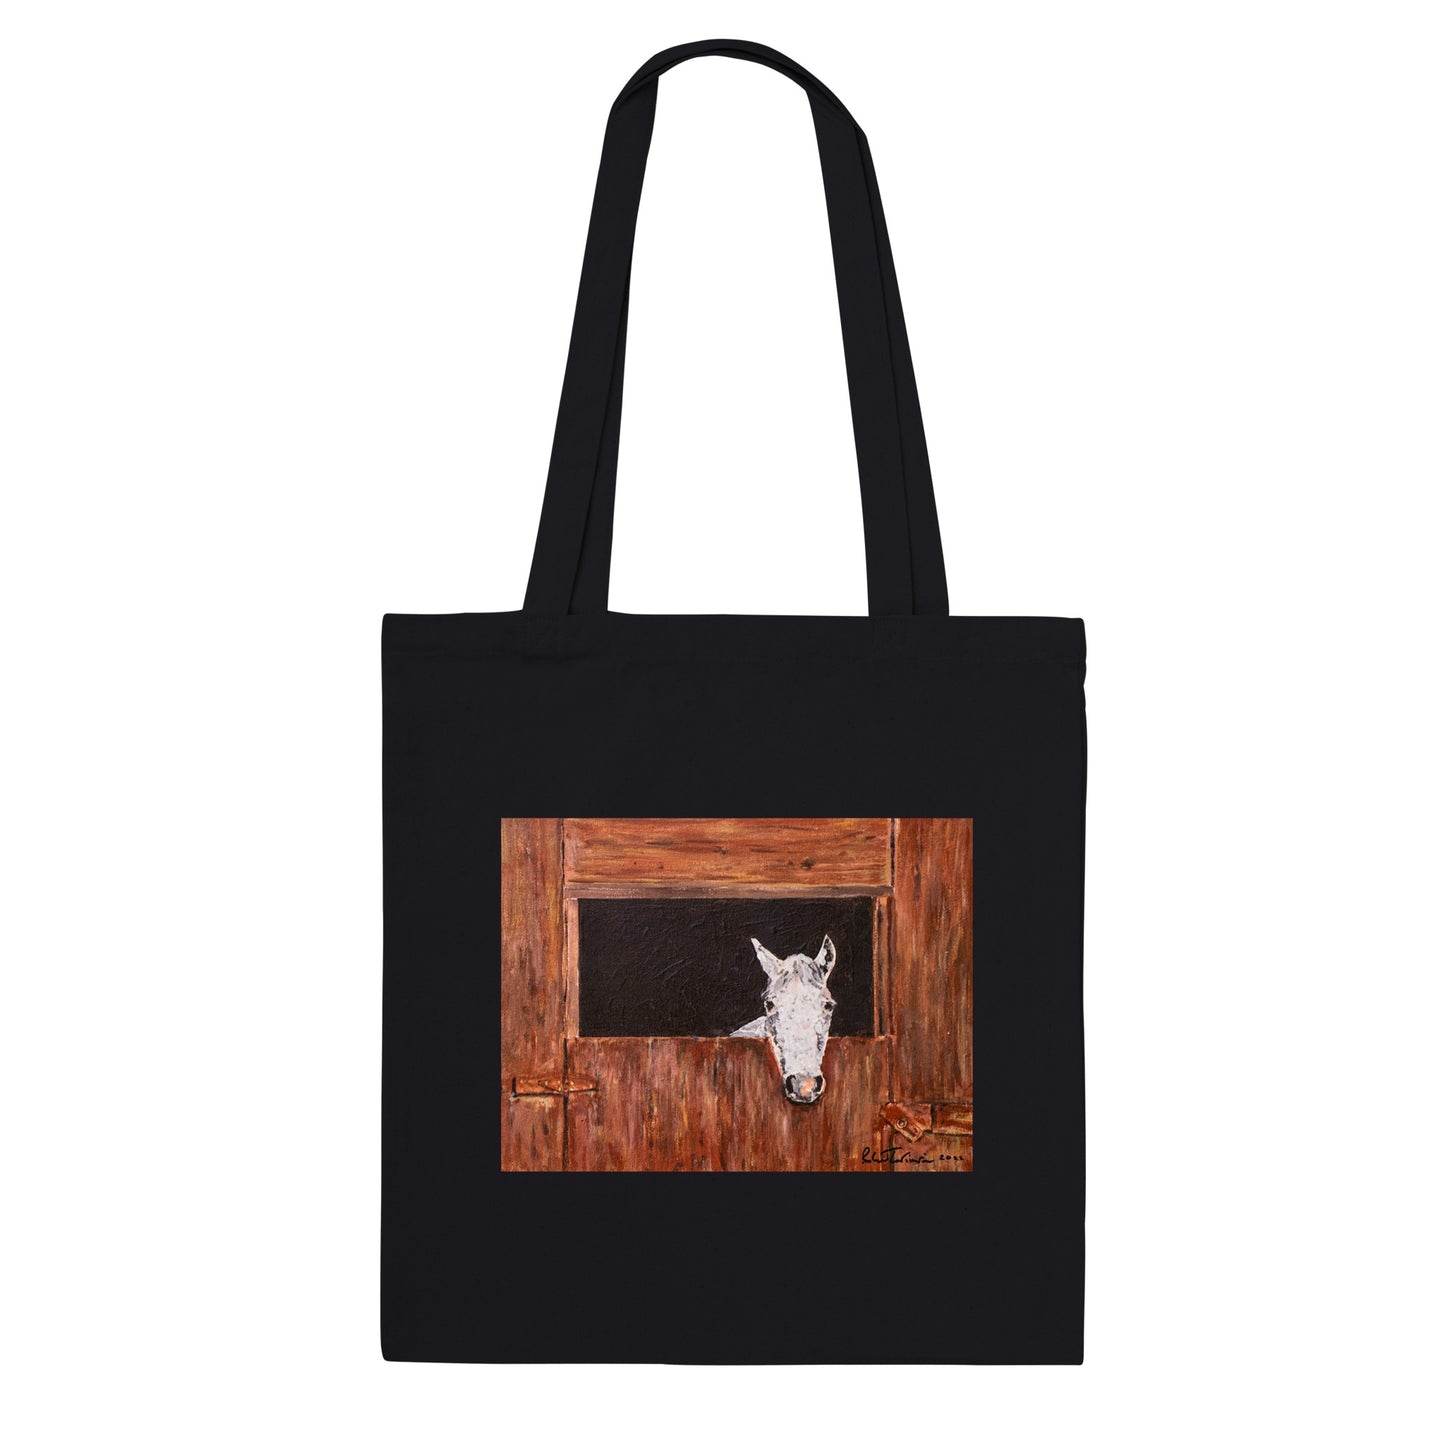 White Horse In Stall - Tote Bag